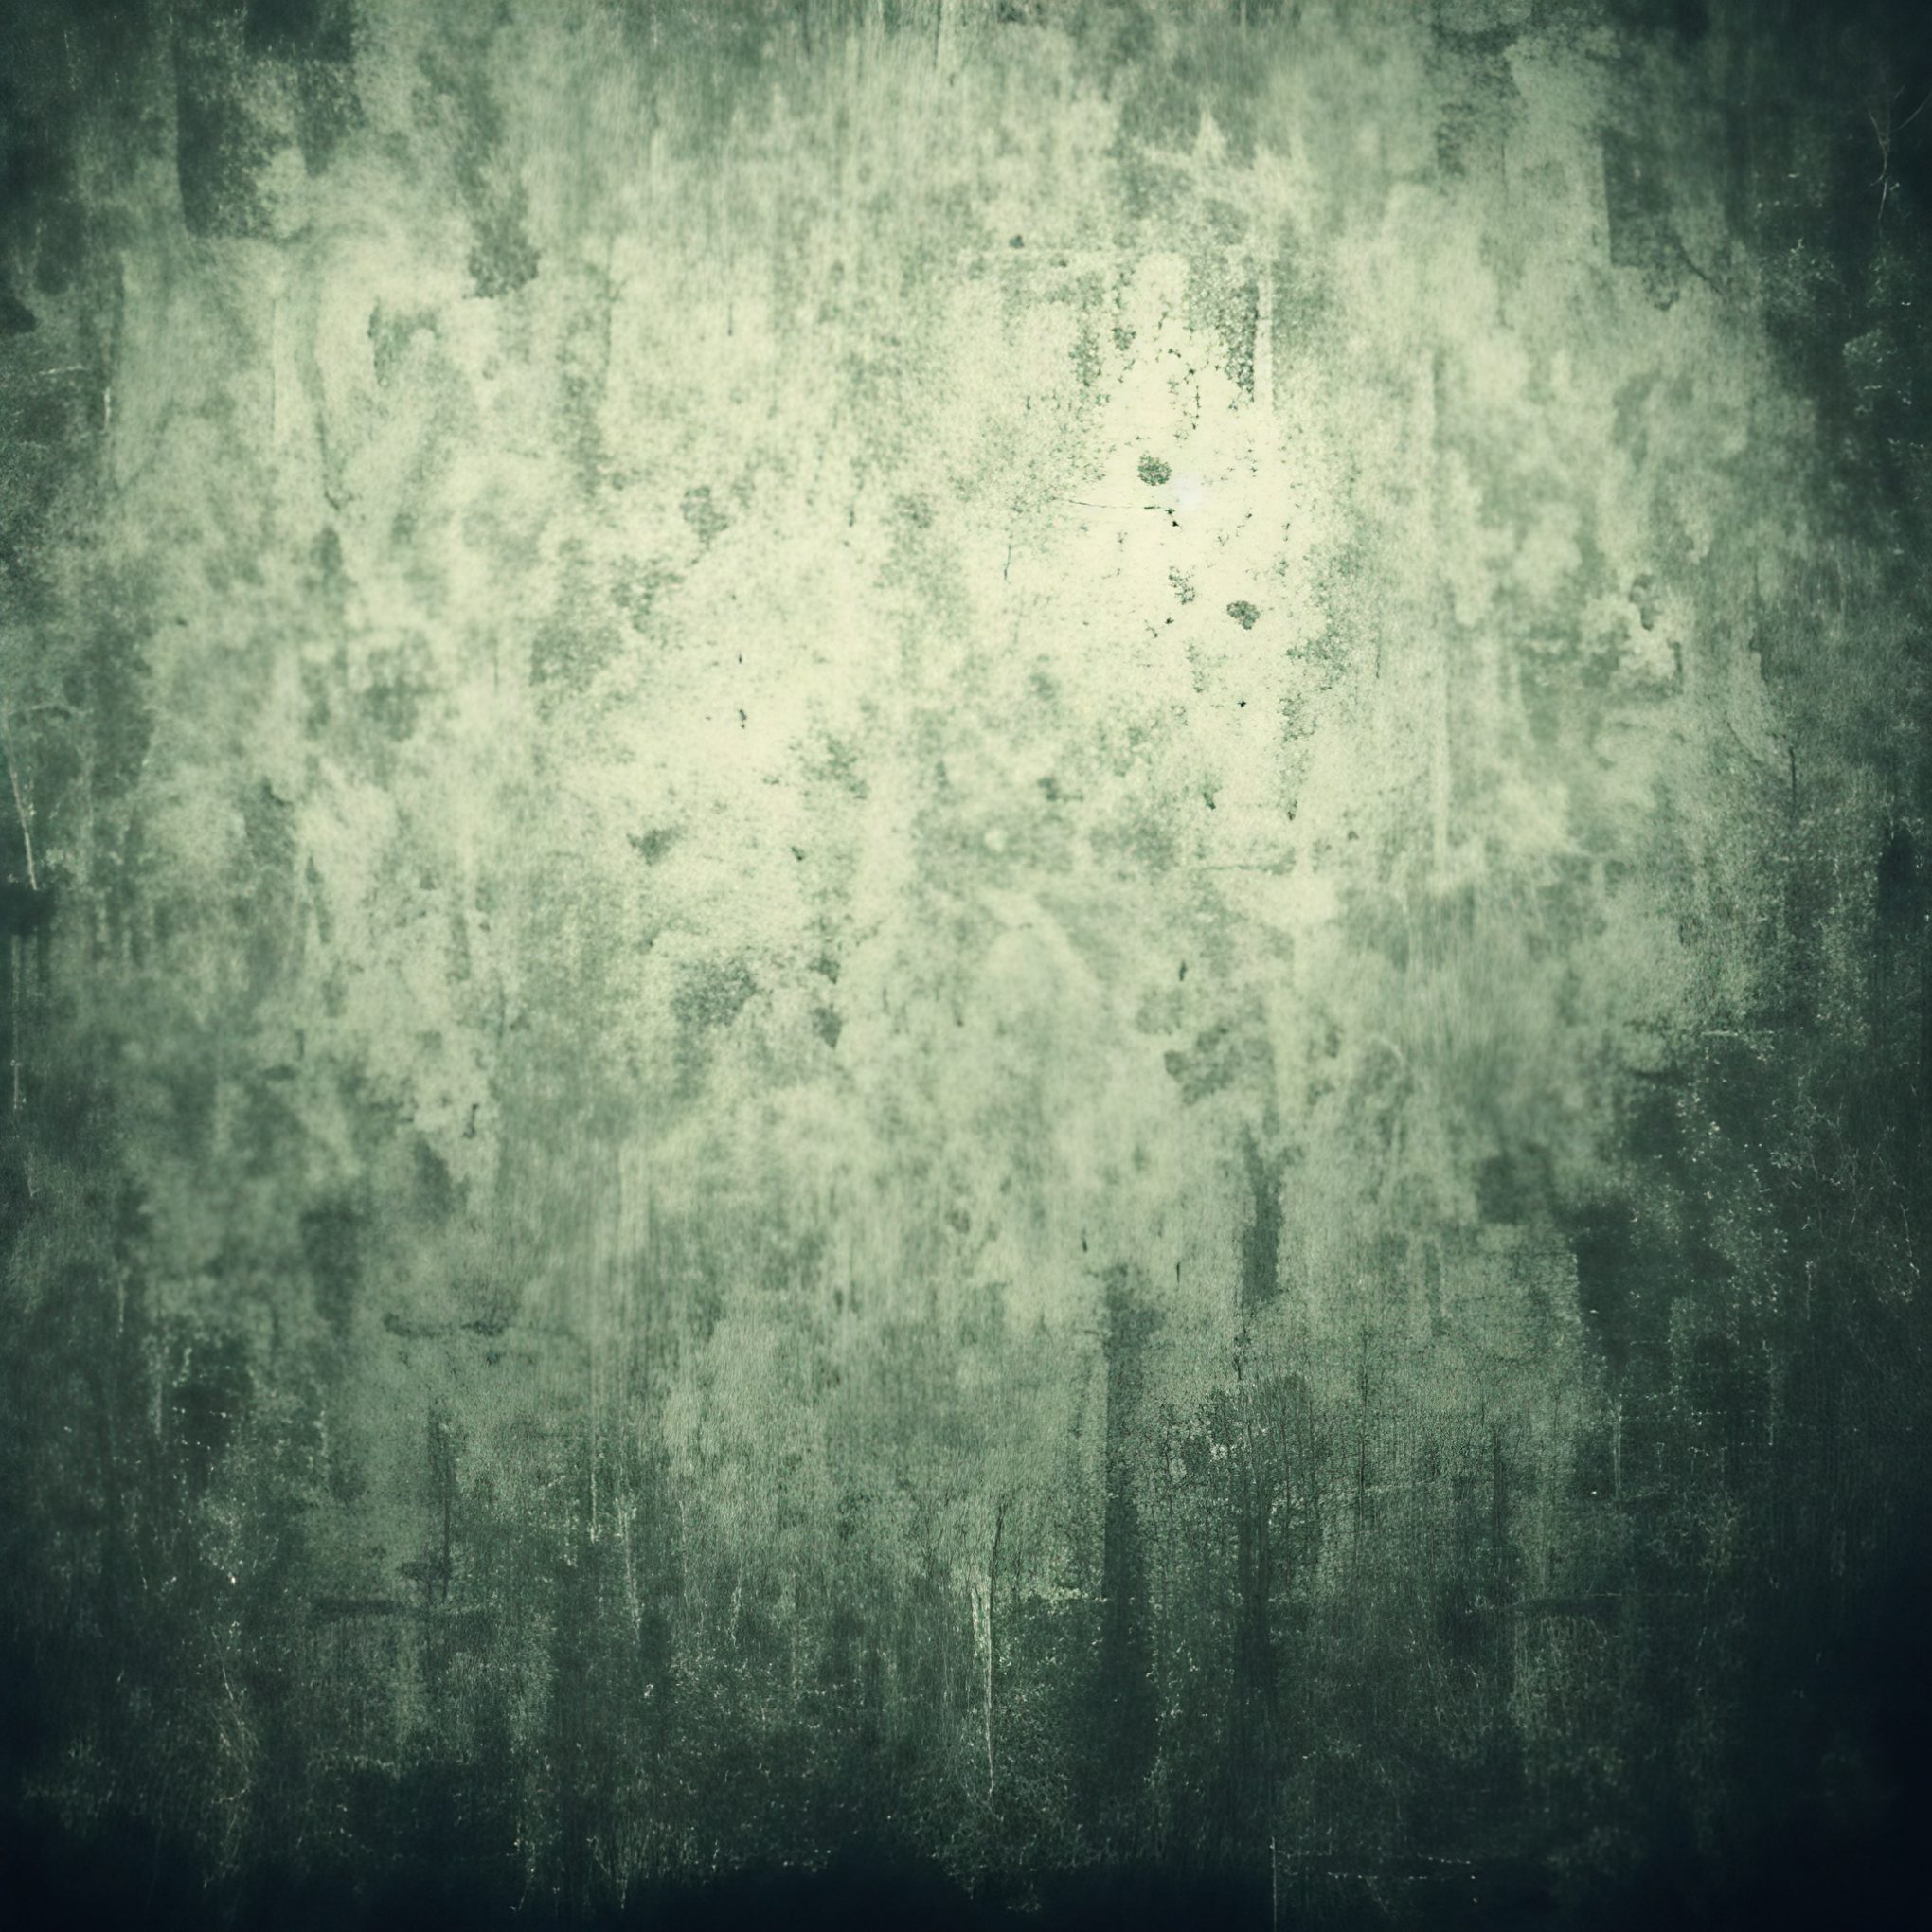 Haunted Ghostly Horror Background Royalty Free Image